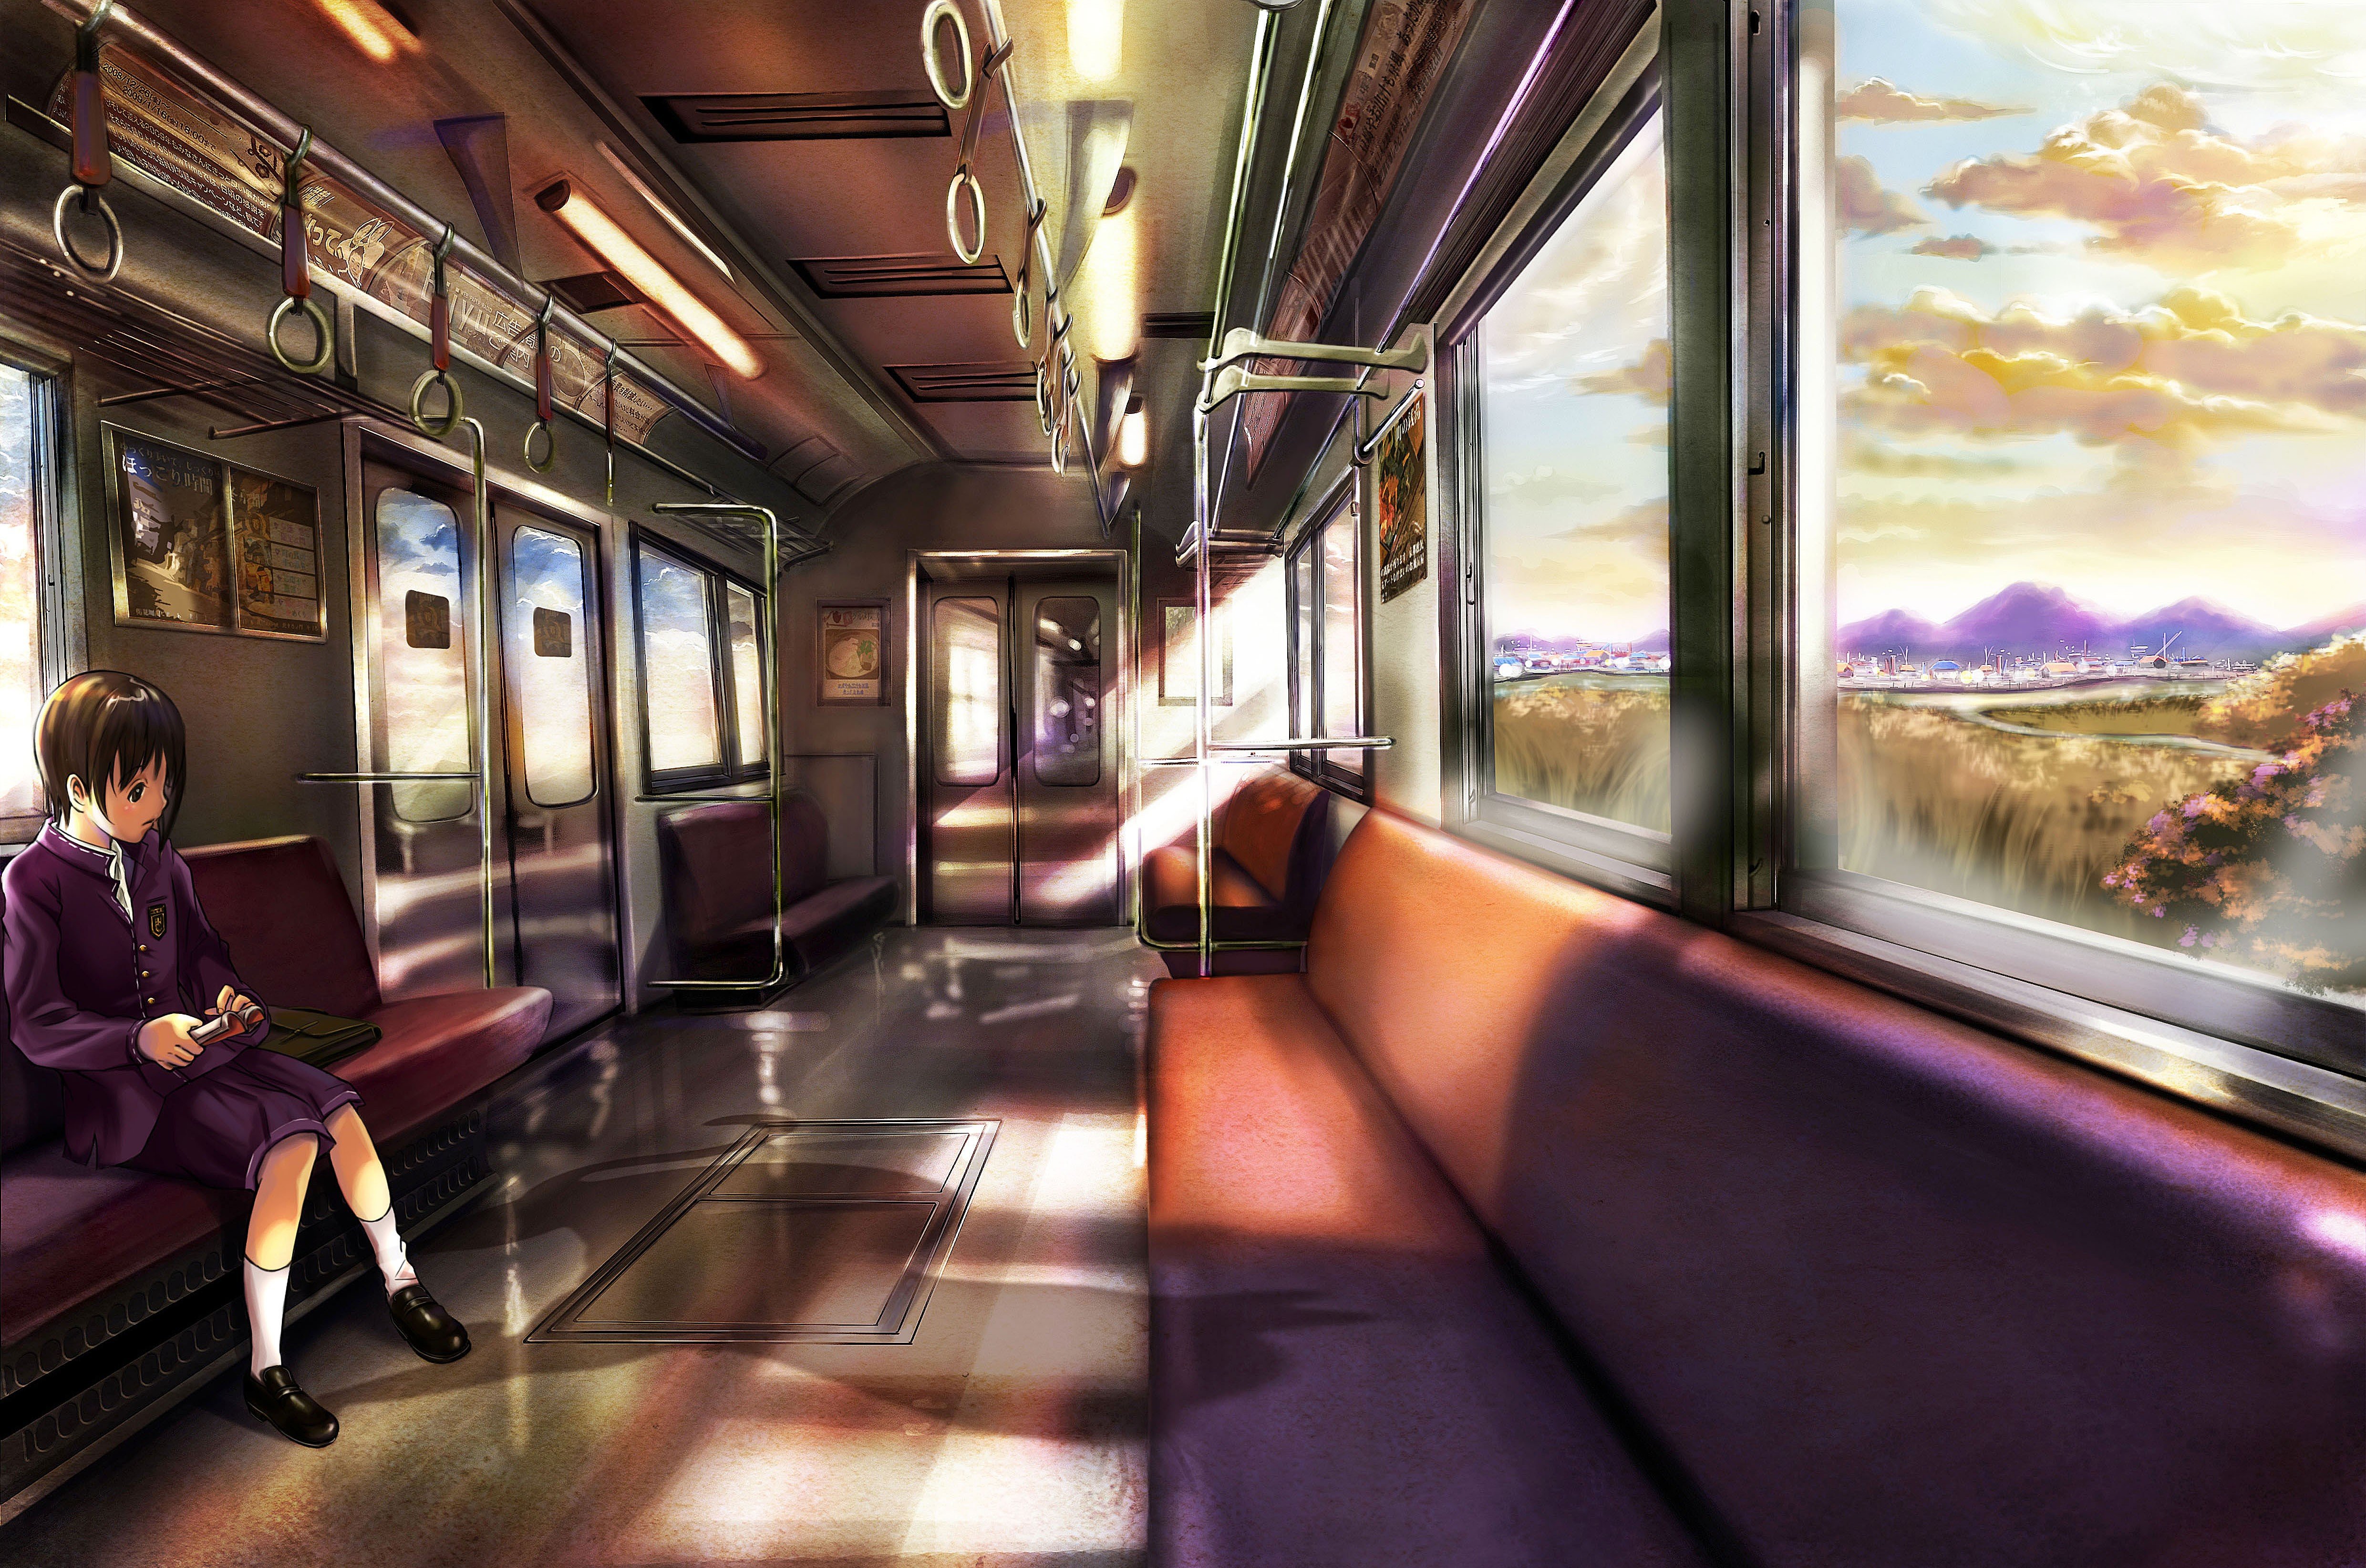 Brunettes Clouds Indoors Room School Uniforms Schoolgirls Trains Socks Brown Eyes Books Short Hair Interior Scenic Sitting Vehicles Anime Girls Bangs Seats Skies Original Characters Whit Wallpapers Hd Desktop And Mobile Browse 4,928 train interior stock photos and images available, or search for subway train interior or old train interior to find more great stock photos and. wallup net